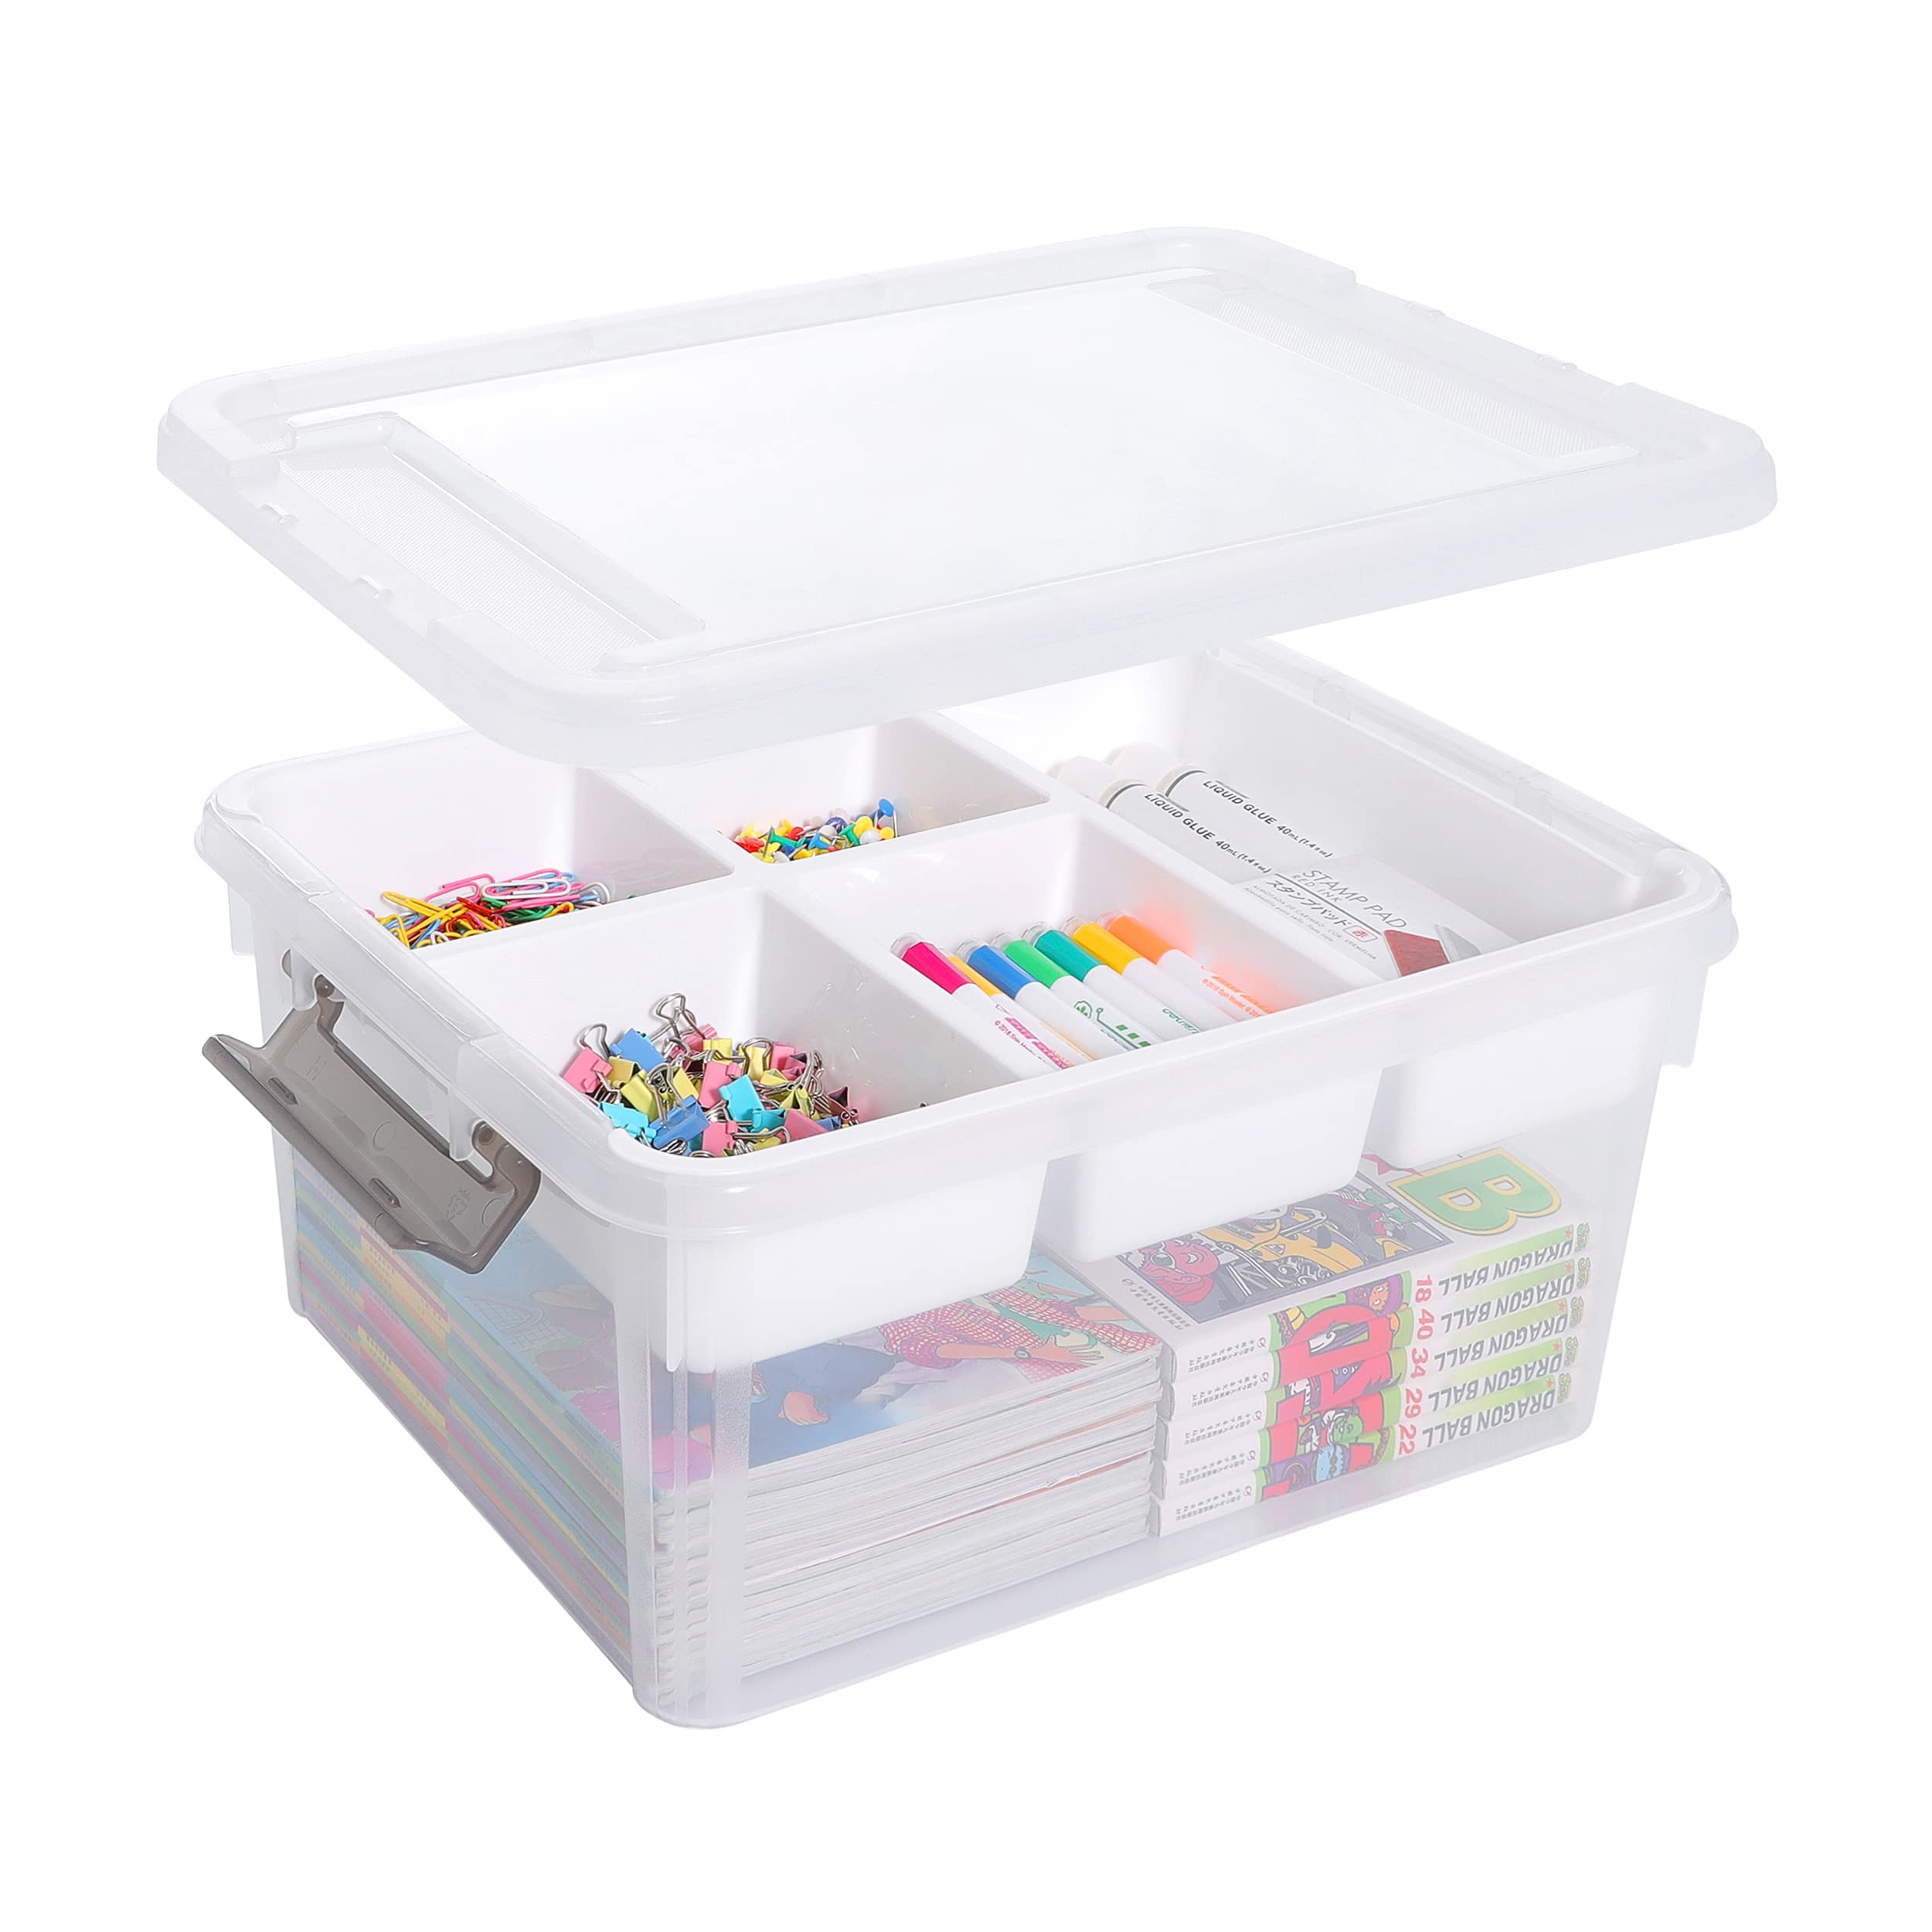 Citylife 17 QT Plastic Storage Box with Removable Tray Craft Organizers and Storage Clear Storage Container for Organizing Lego, Bead, Tool, Sewing, Playdoh